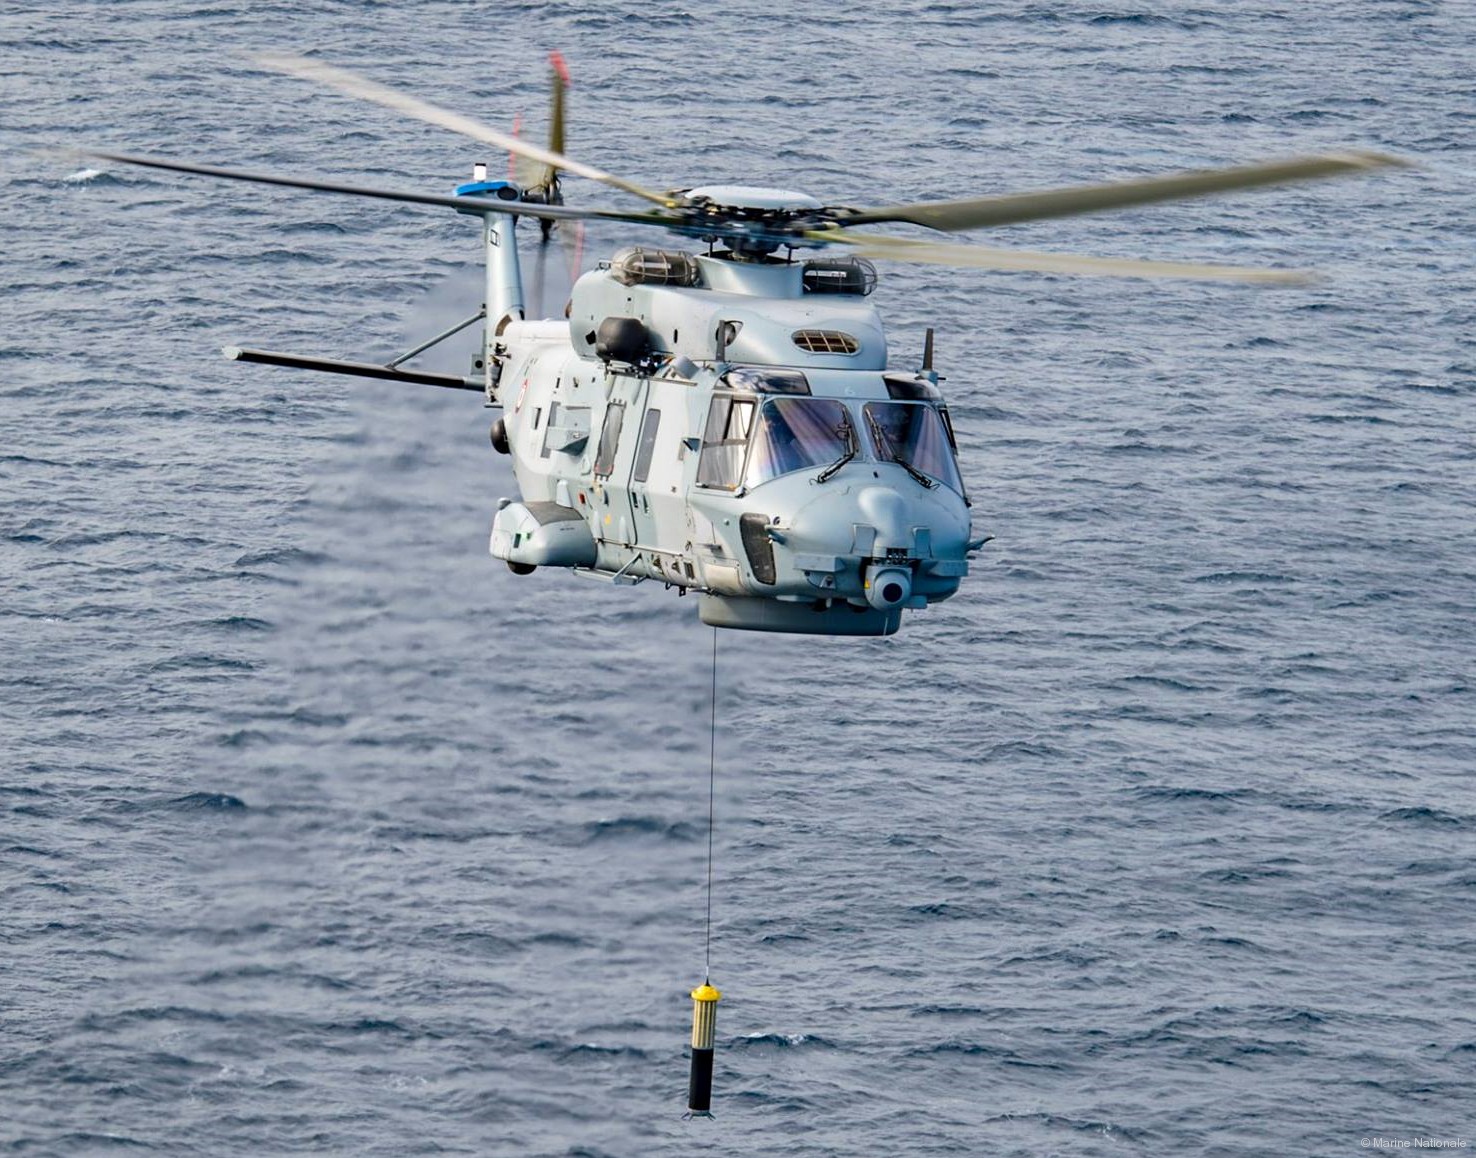 nh90 caiman nfh helicopter french navy marine nationale aeronavale flottille 31f 33f 29 asw dipping sonar